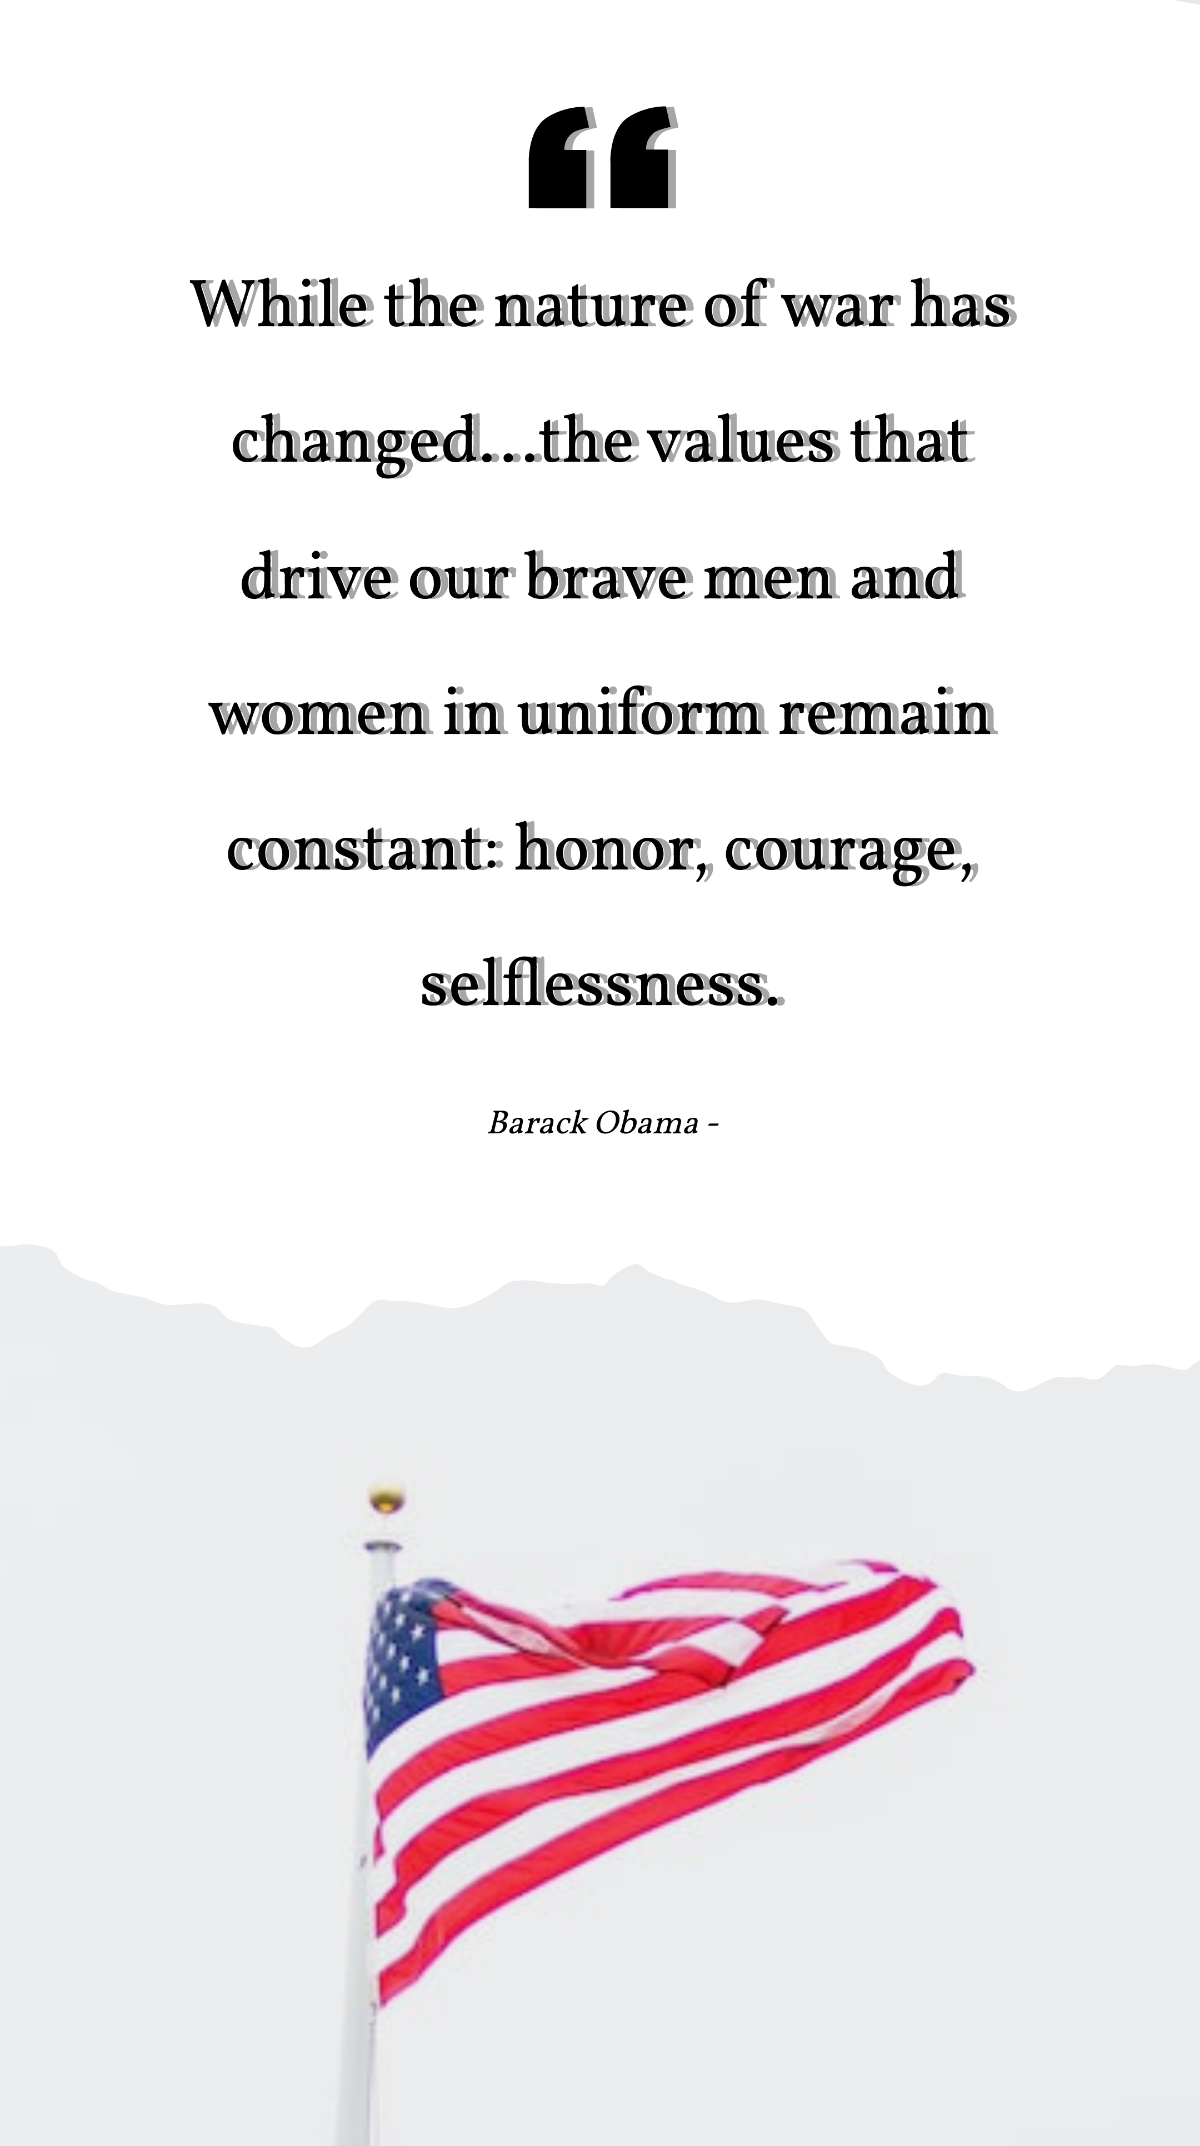 Barack Obama - While the nature of war has changed...the values that drive our brave men and women in uniform remain constant: honor, courage, selflessness.